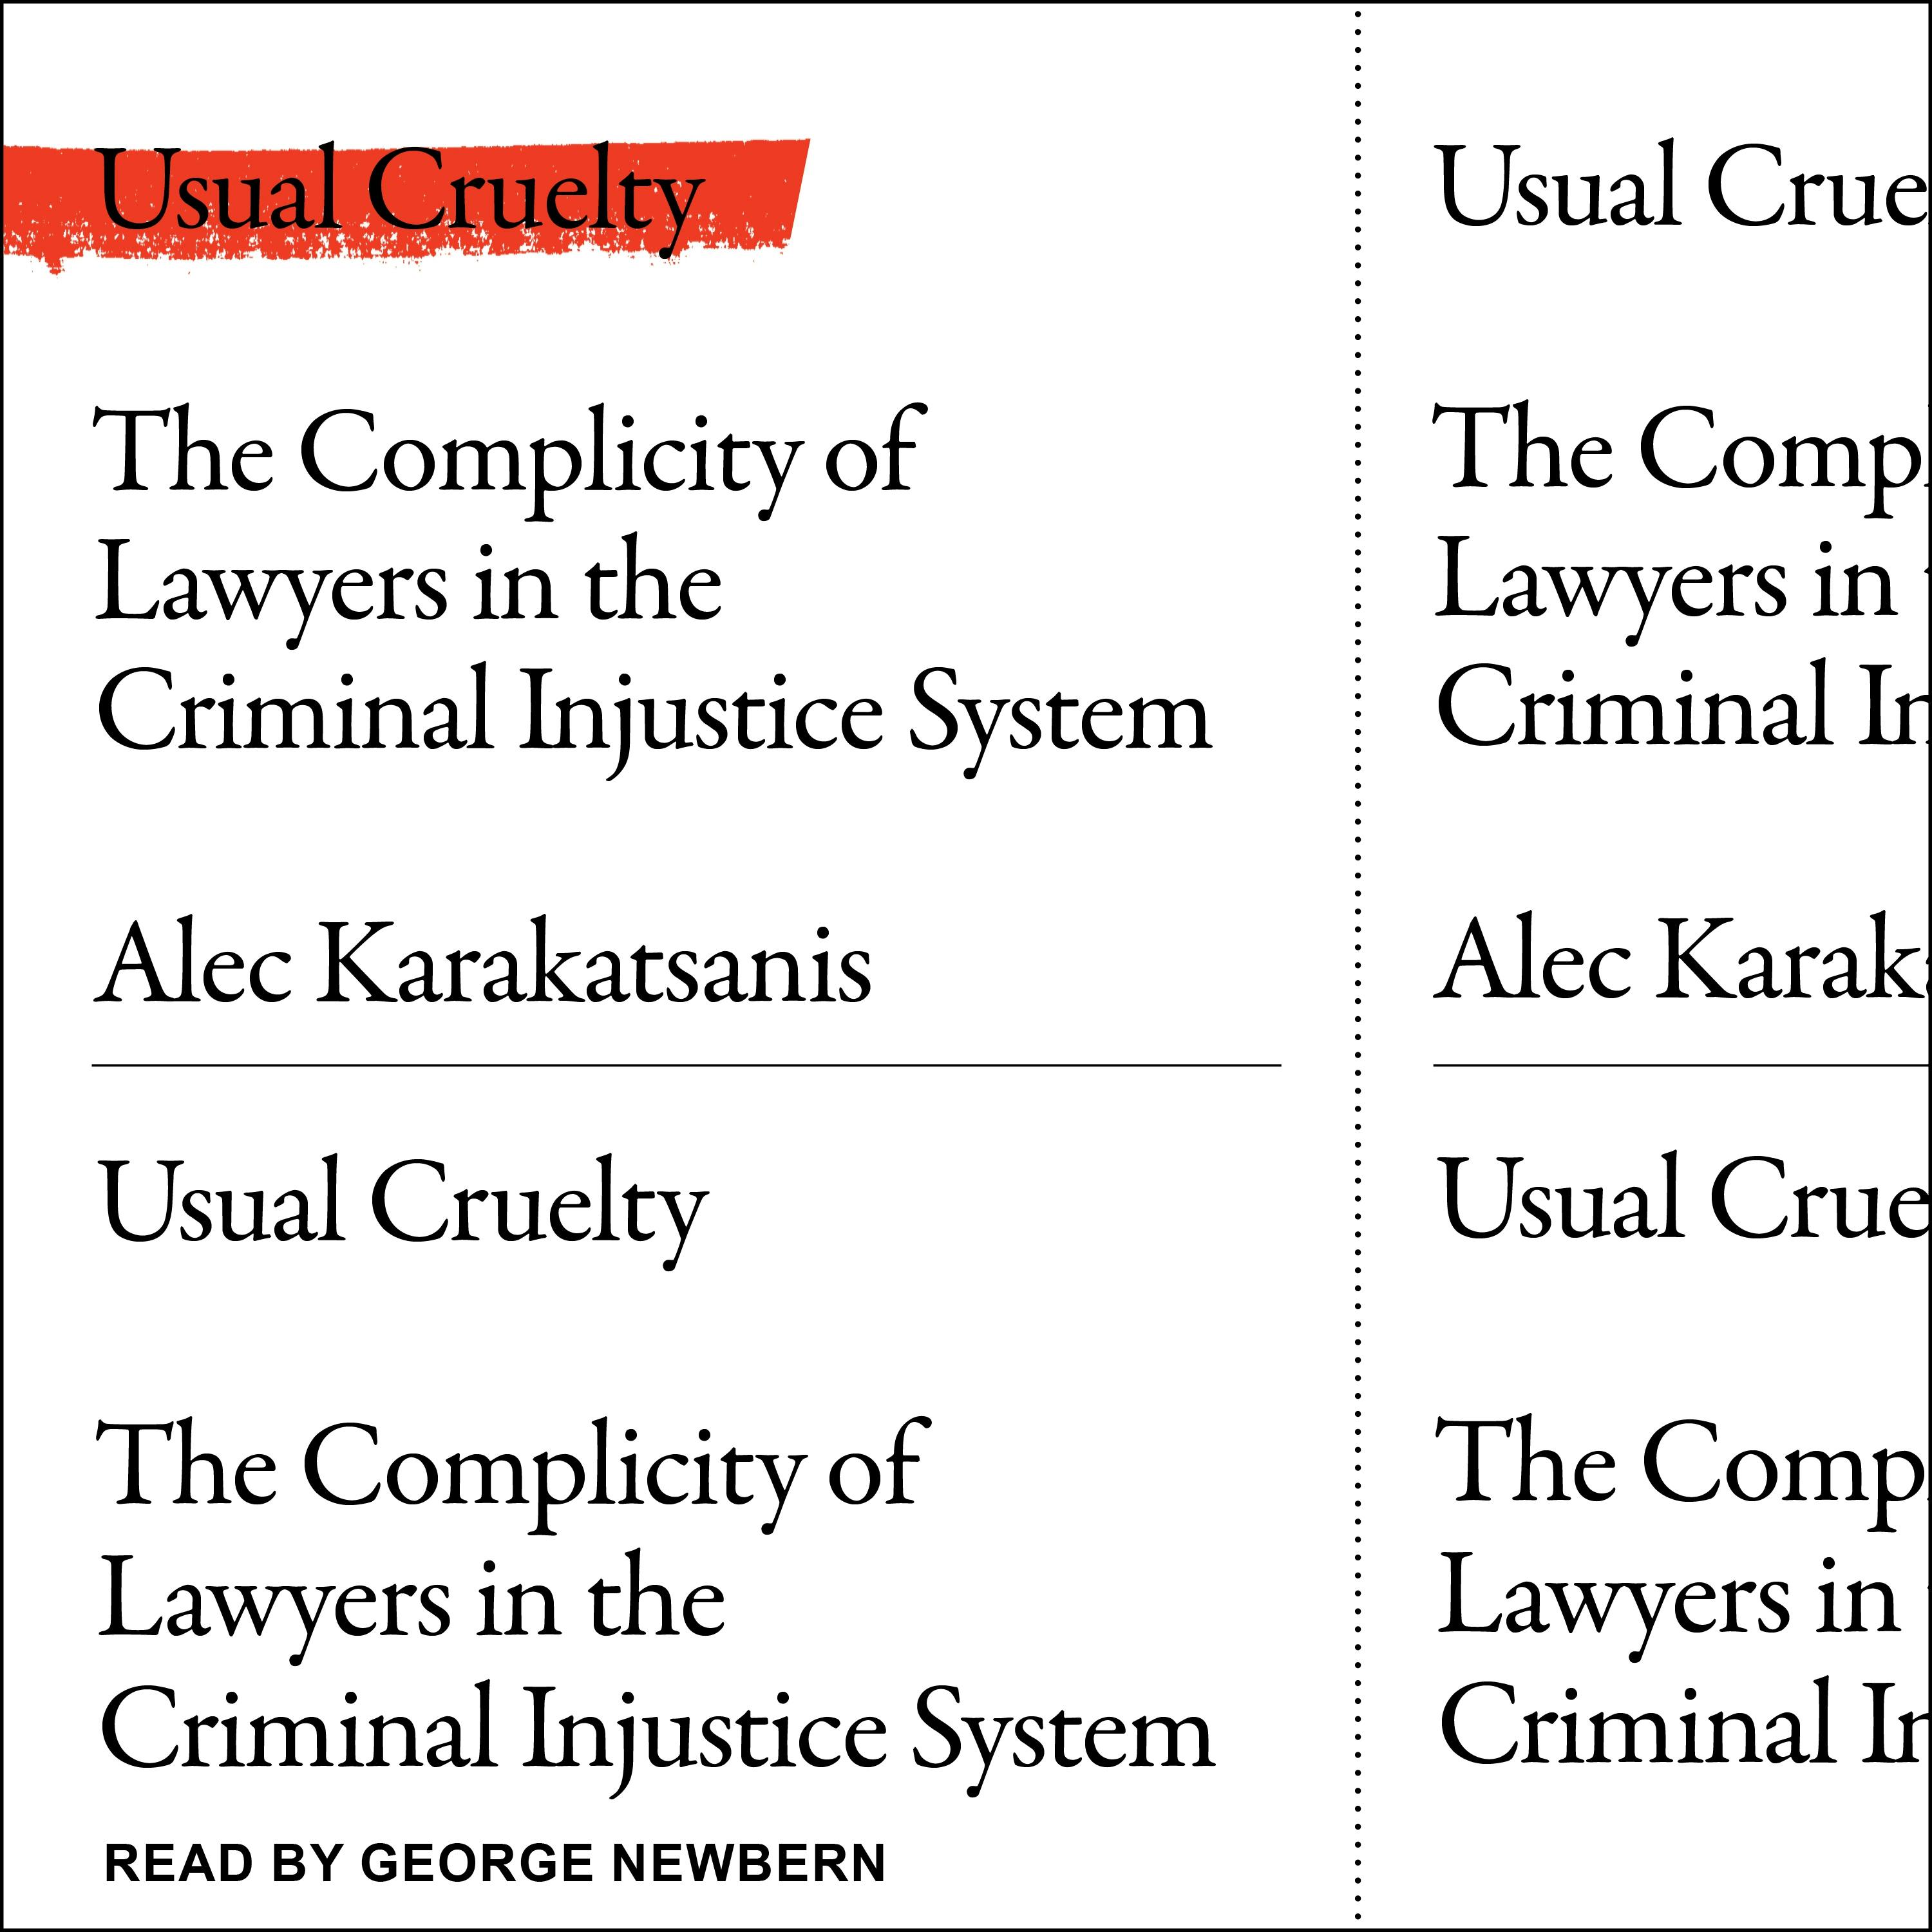 Usual Cruelty: The Complicity of Lawyers in the Criminal Justice System - Alec Karakatsanis